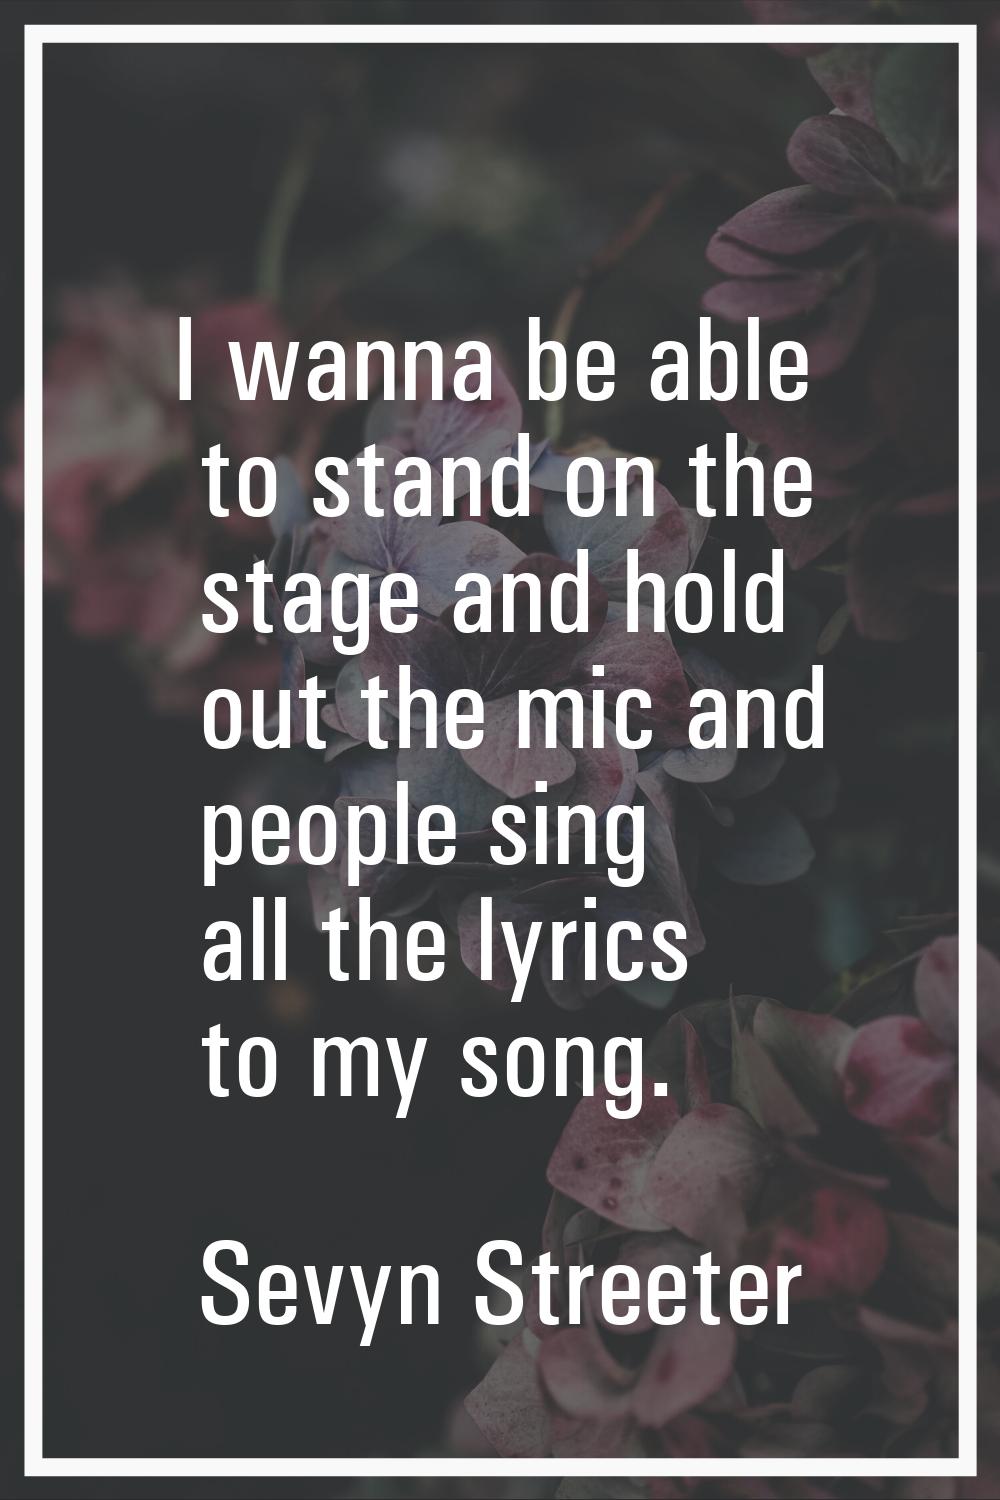 I wanna be able to stand on the stage and hold out the mic and people sing all the lyrics to my son